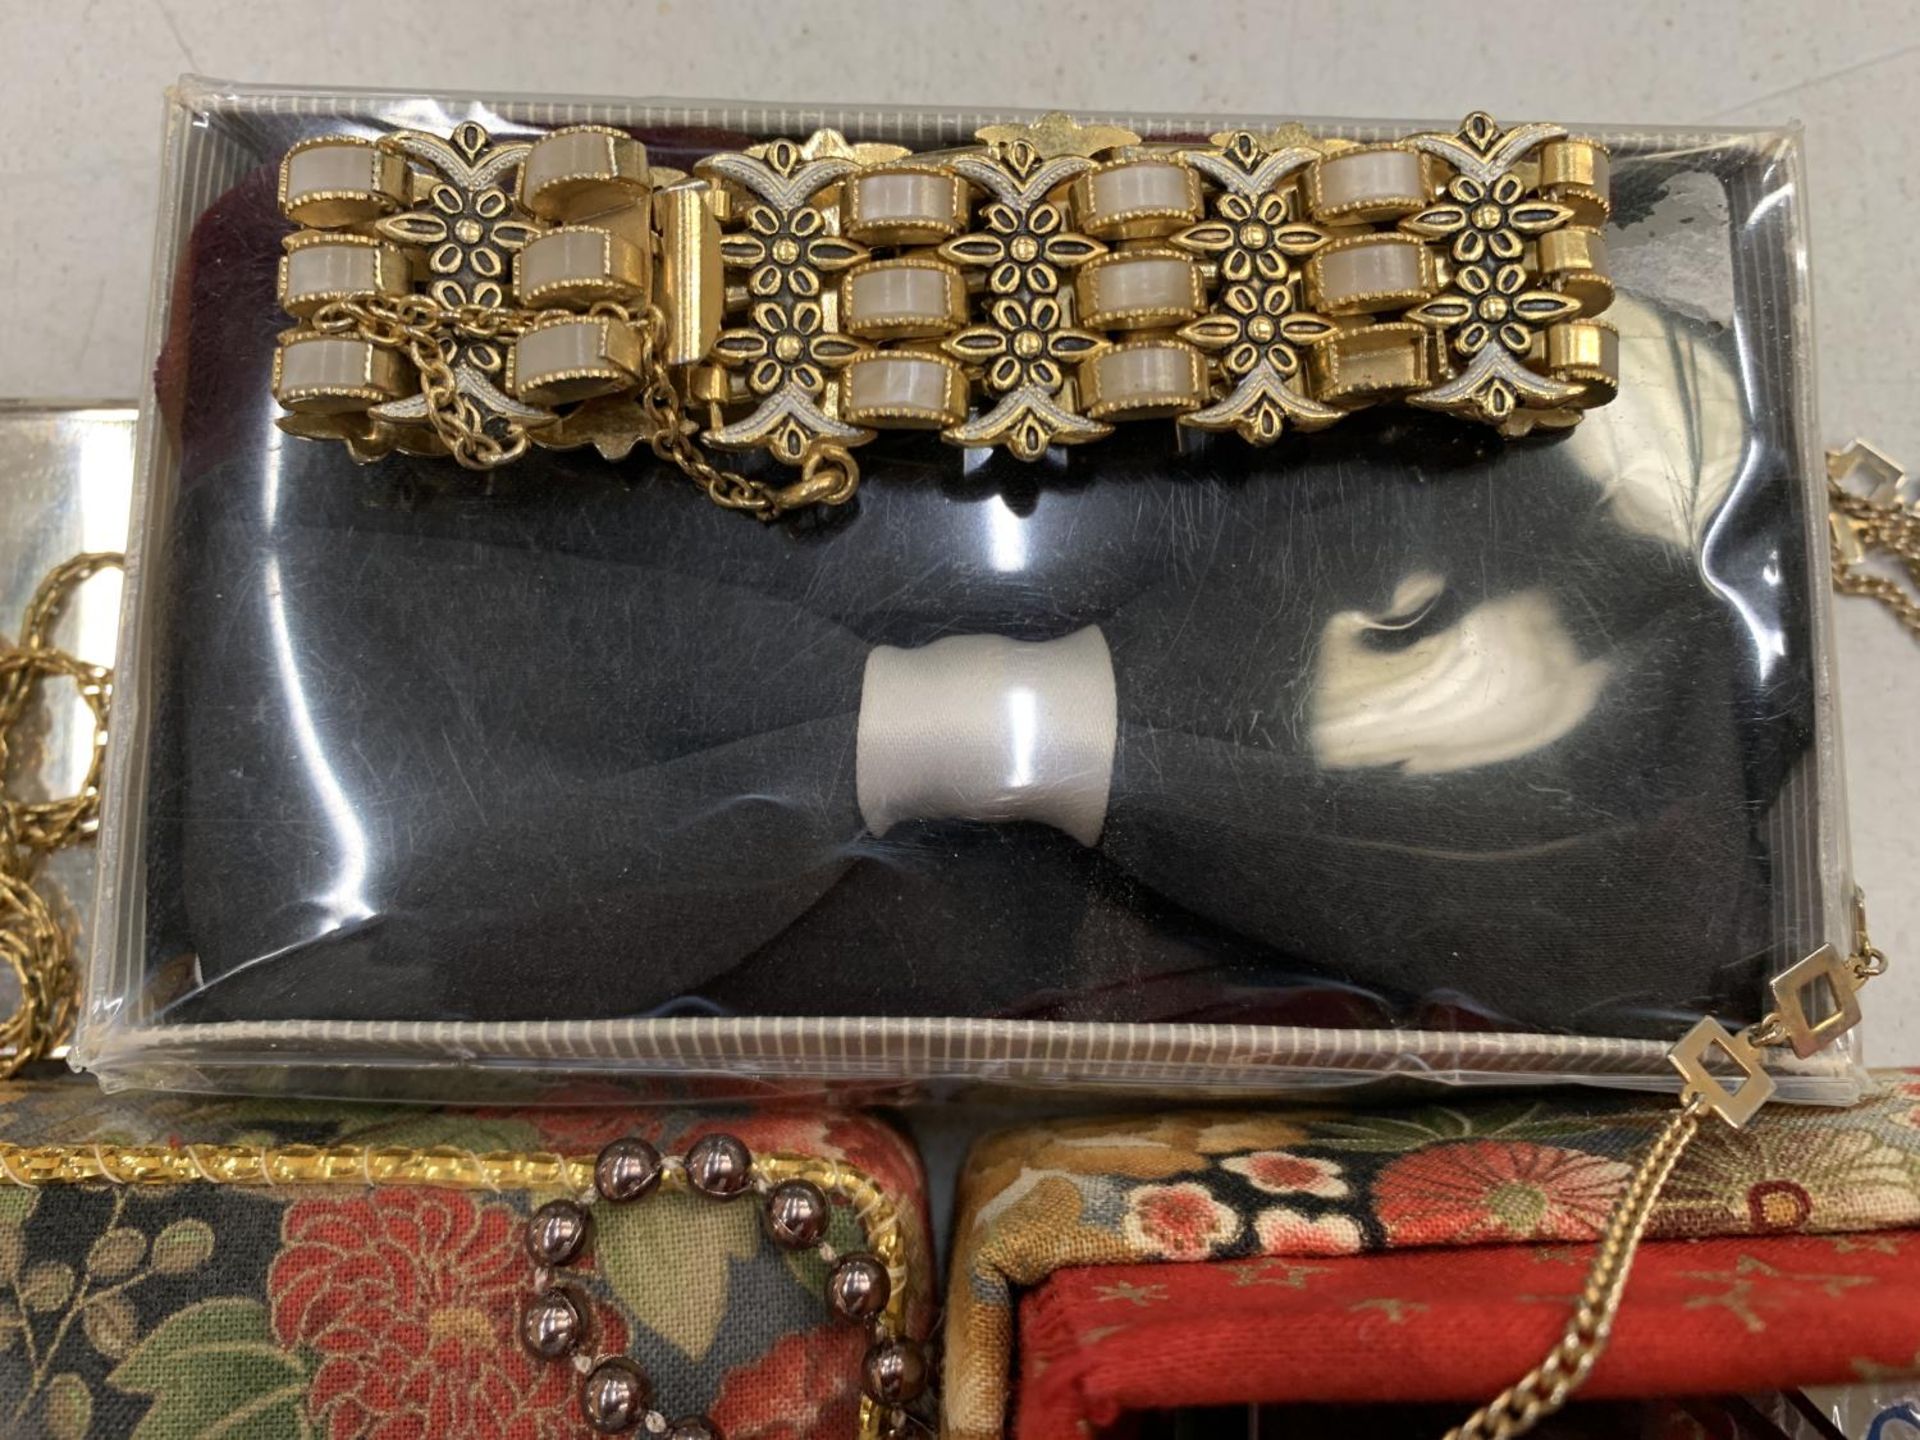 A QUANTITY OF COSTUME JEWELLERY TO INCLUDE NECKLACES, EARRINGS, BANGLES, ETC - Image 4 of 5